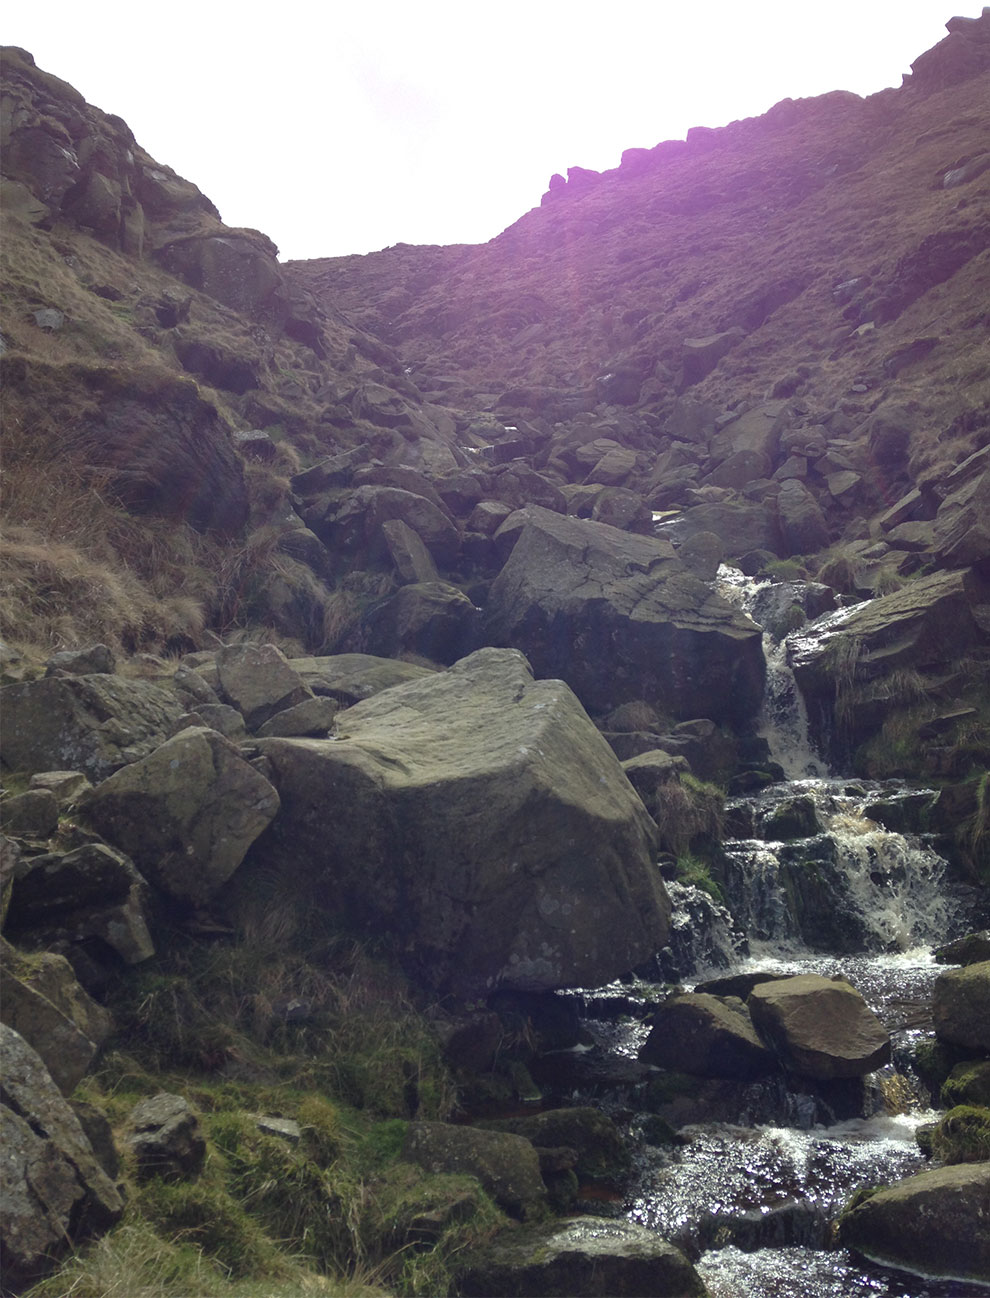 Scrambling up rocks on Nether Red Brook